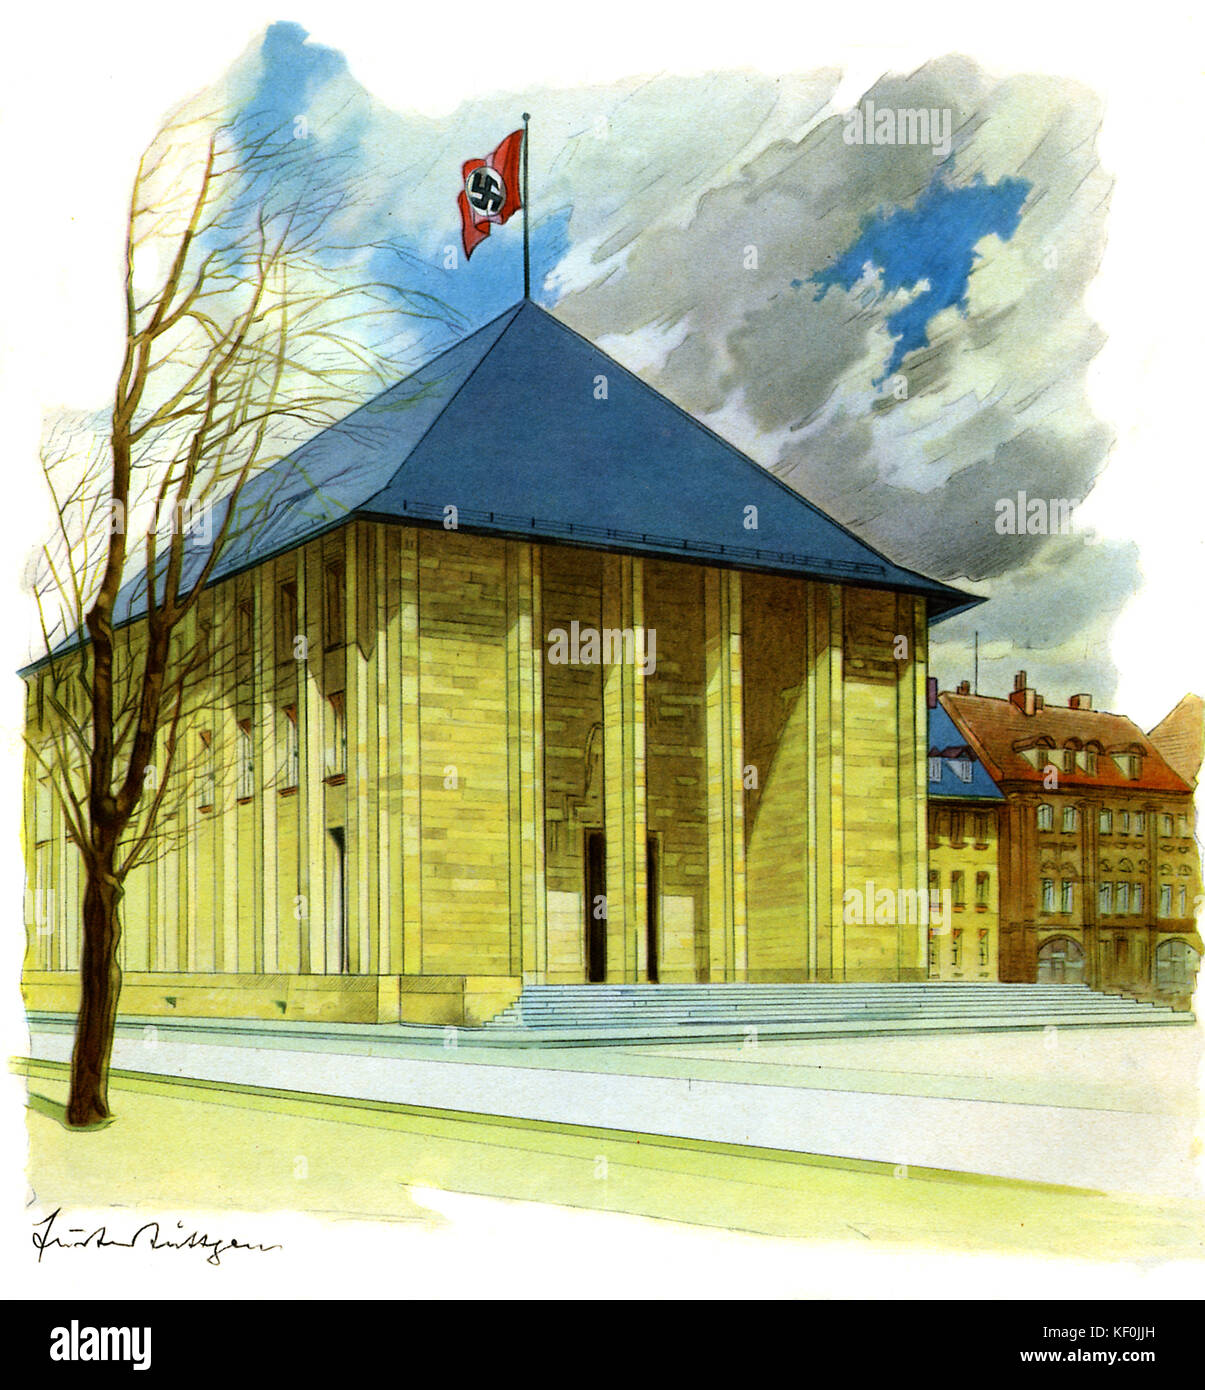 Bayreuth: Ludwig Siebert Festhalle  in 1938 with Swastika flag.  Source: tourist brochure for Bayreuth published 1938 Stock Photo